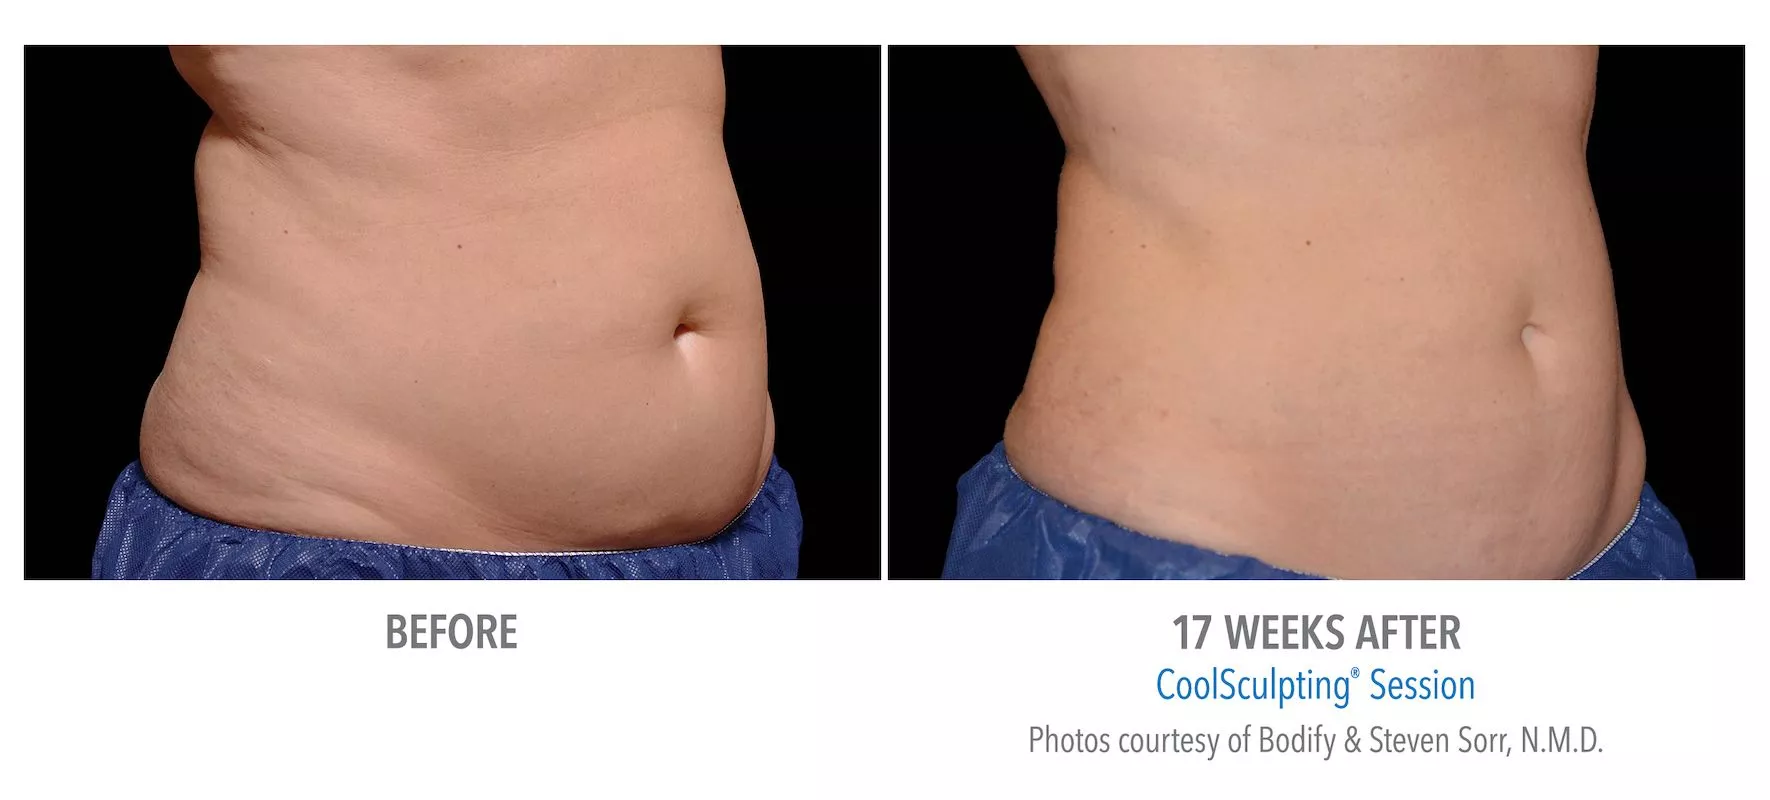 Female CoolSculpting patient in Las Vegas. Before and after photo of lower and upper abs 17 weeks post CoolSculpting treatment.